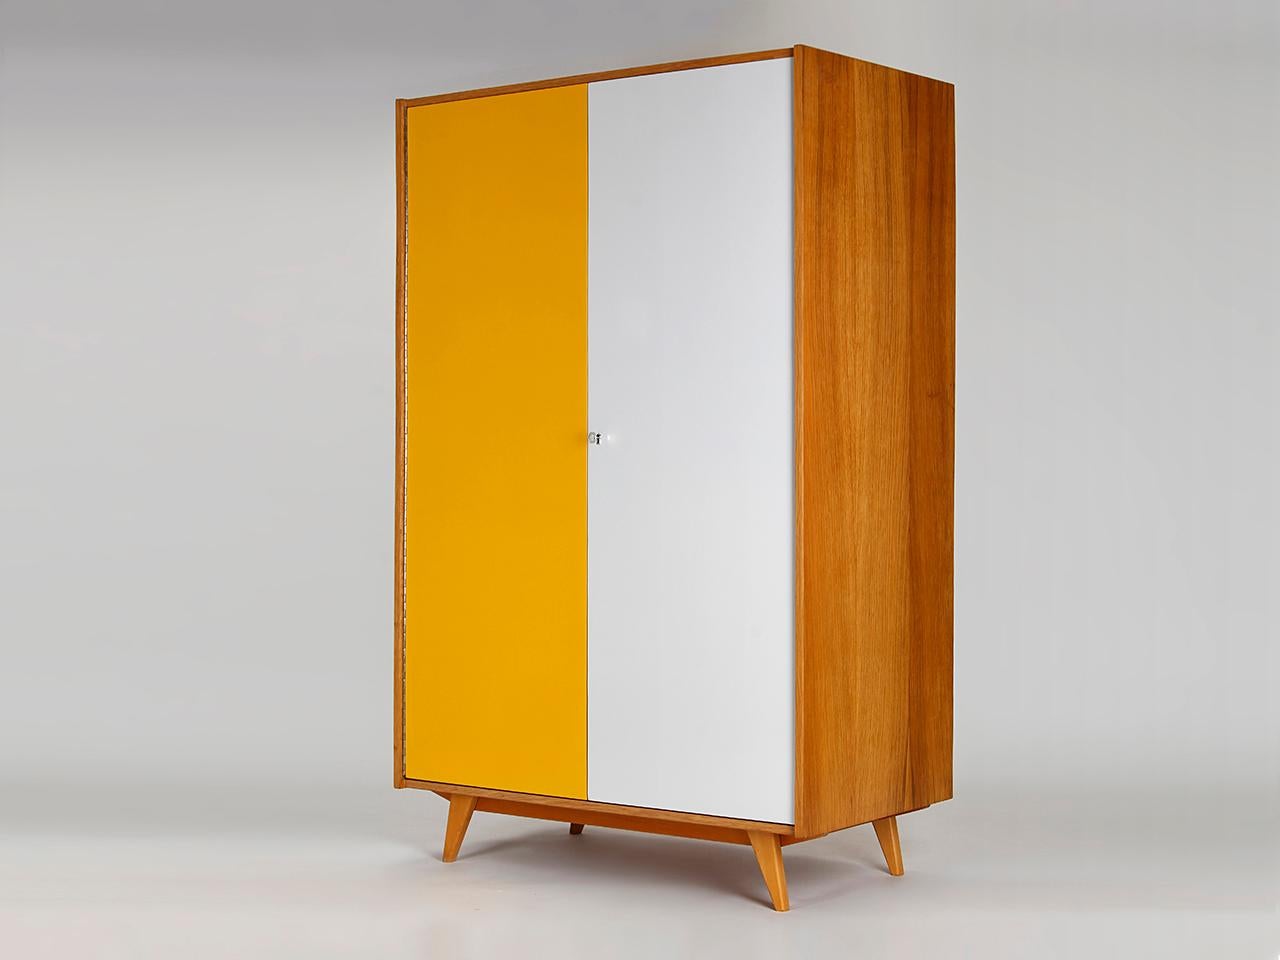 Designed by Jiri Jiroutek for Interier Praha. Manufactured in the 1960s. Completely restored and repainted. With the removable shelves, the linen cupboard can be transformed into a wardrobe.